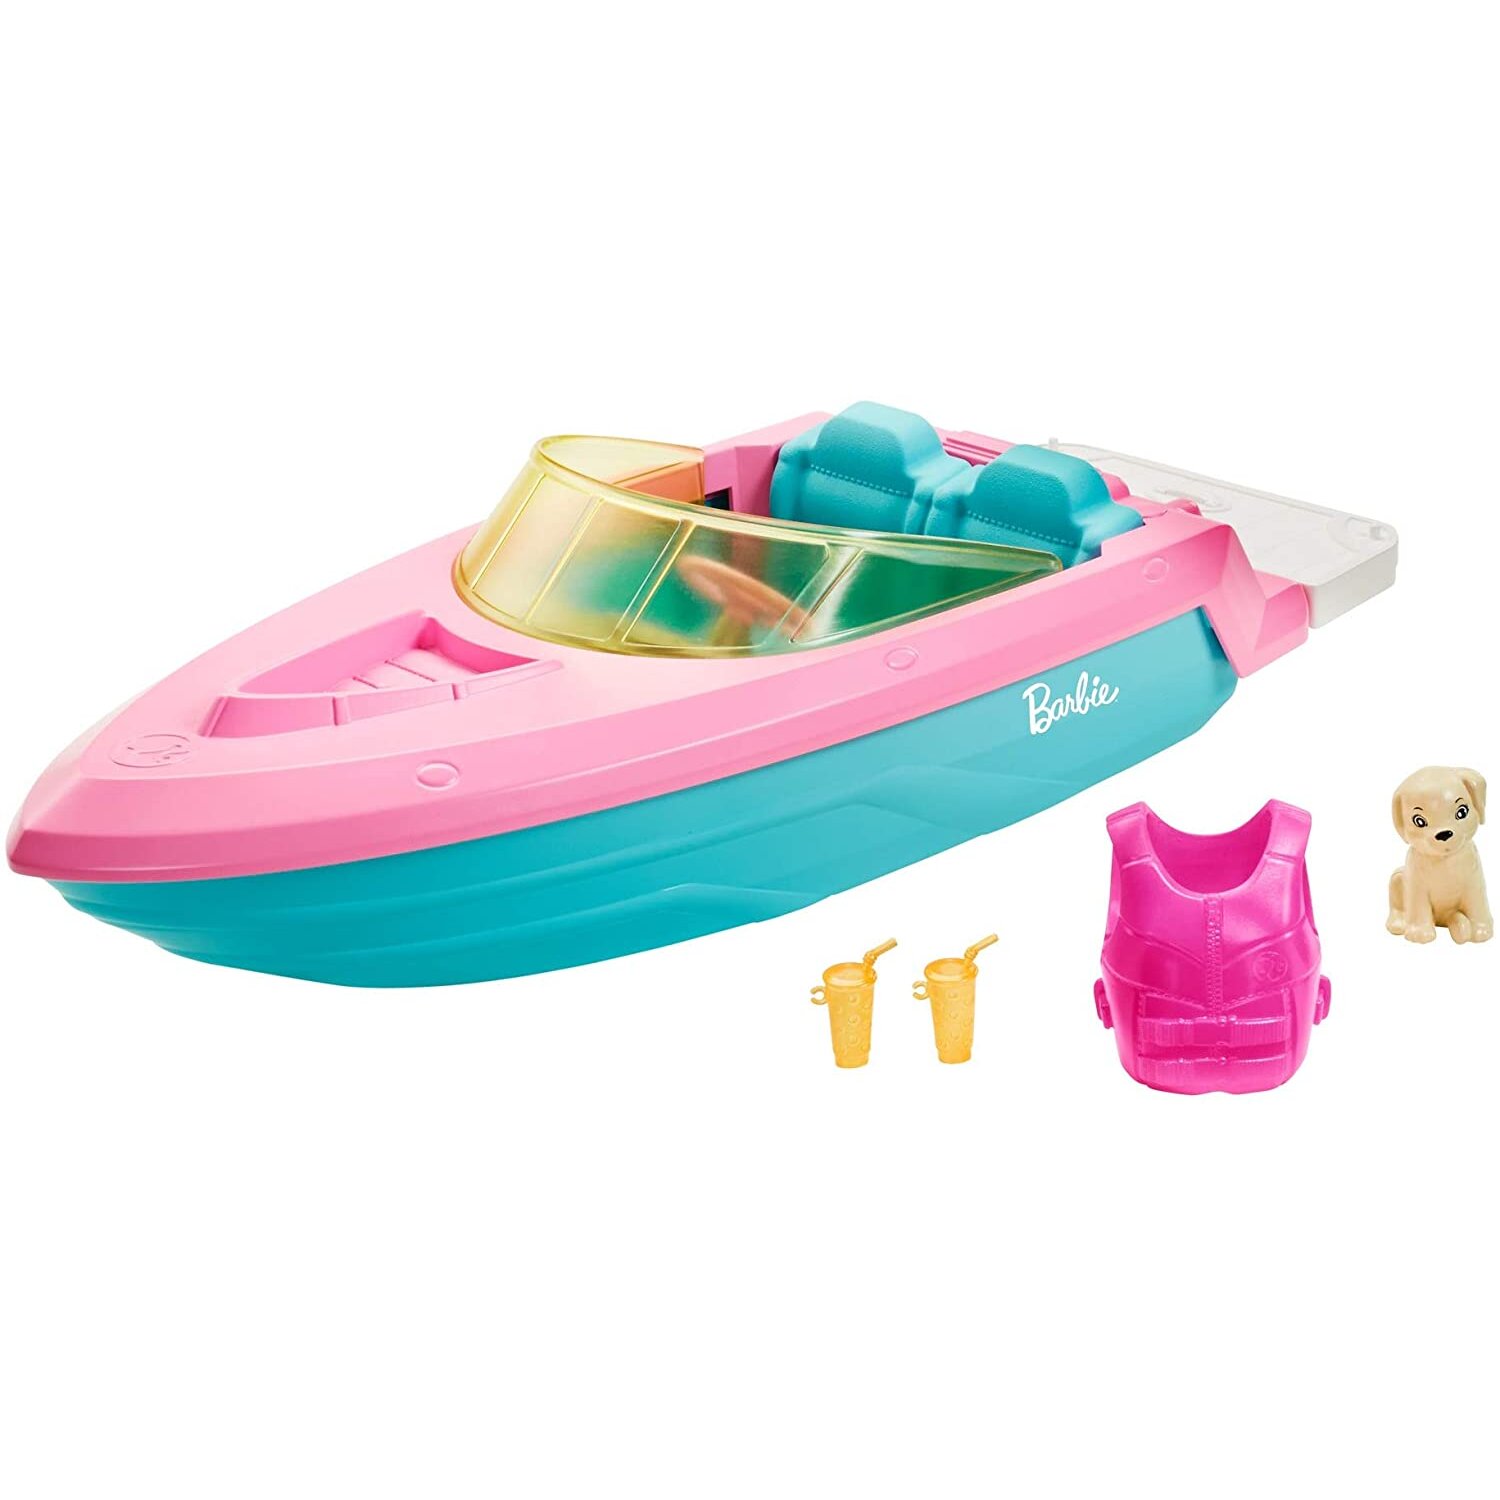 Barbies Boat Playset